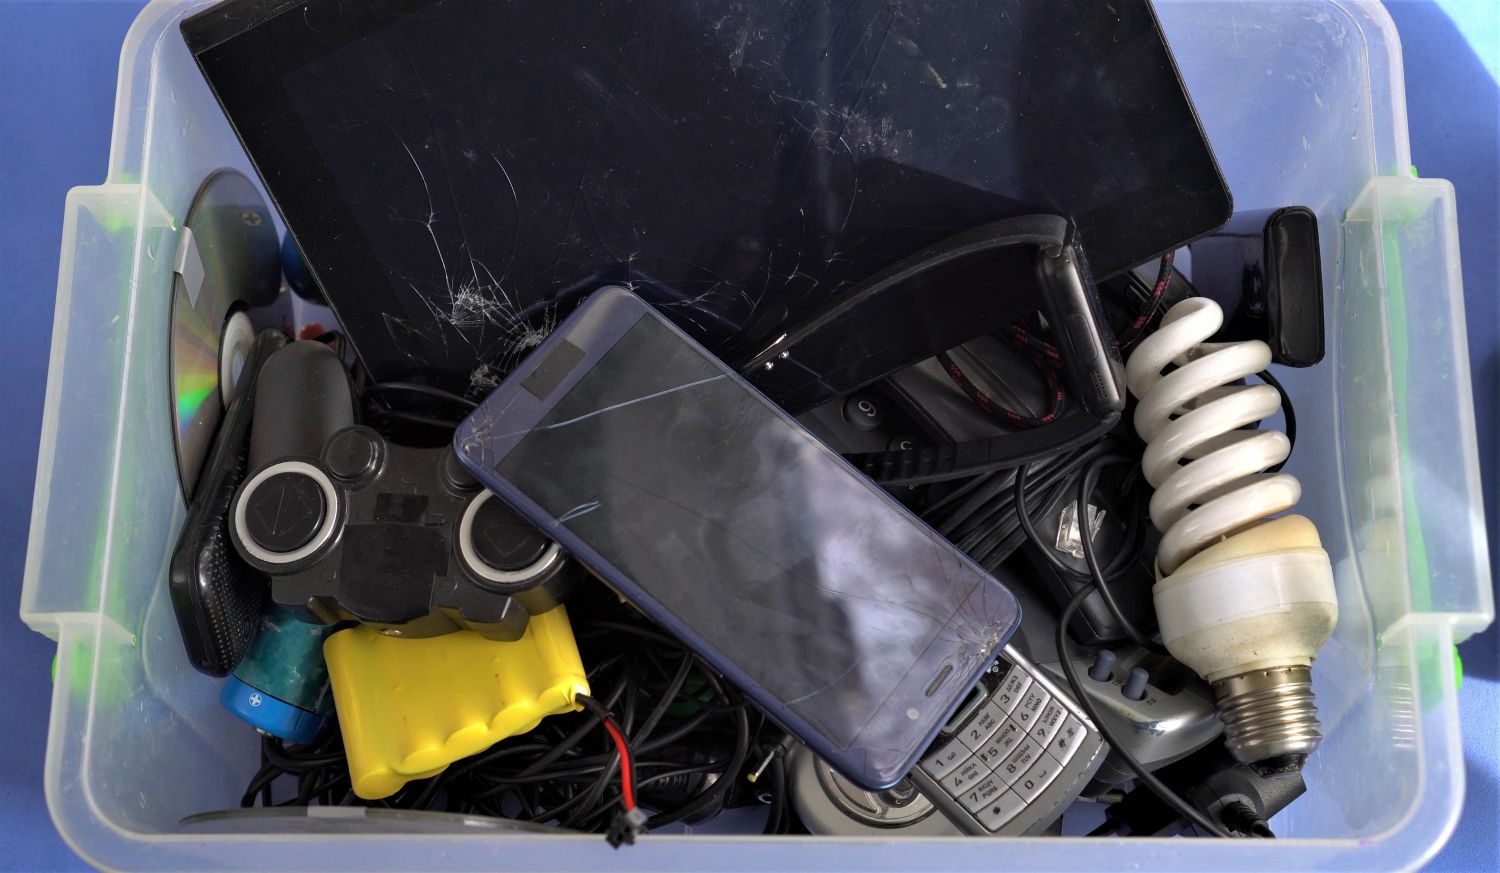 Hazardous waste in a plastic container including ewaste and light bulbs